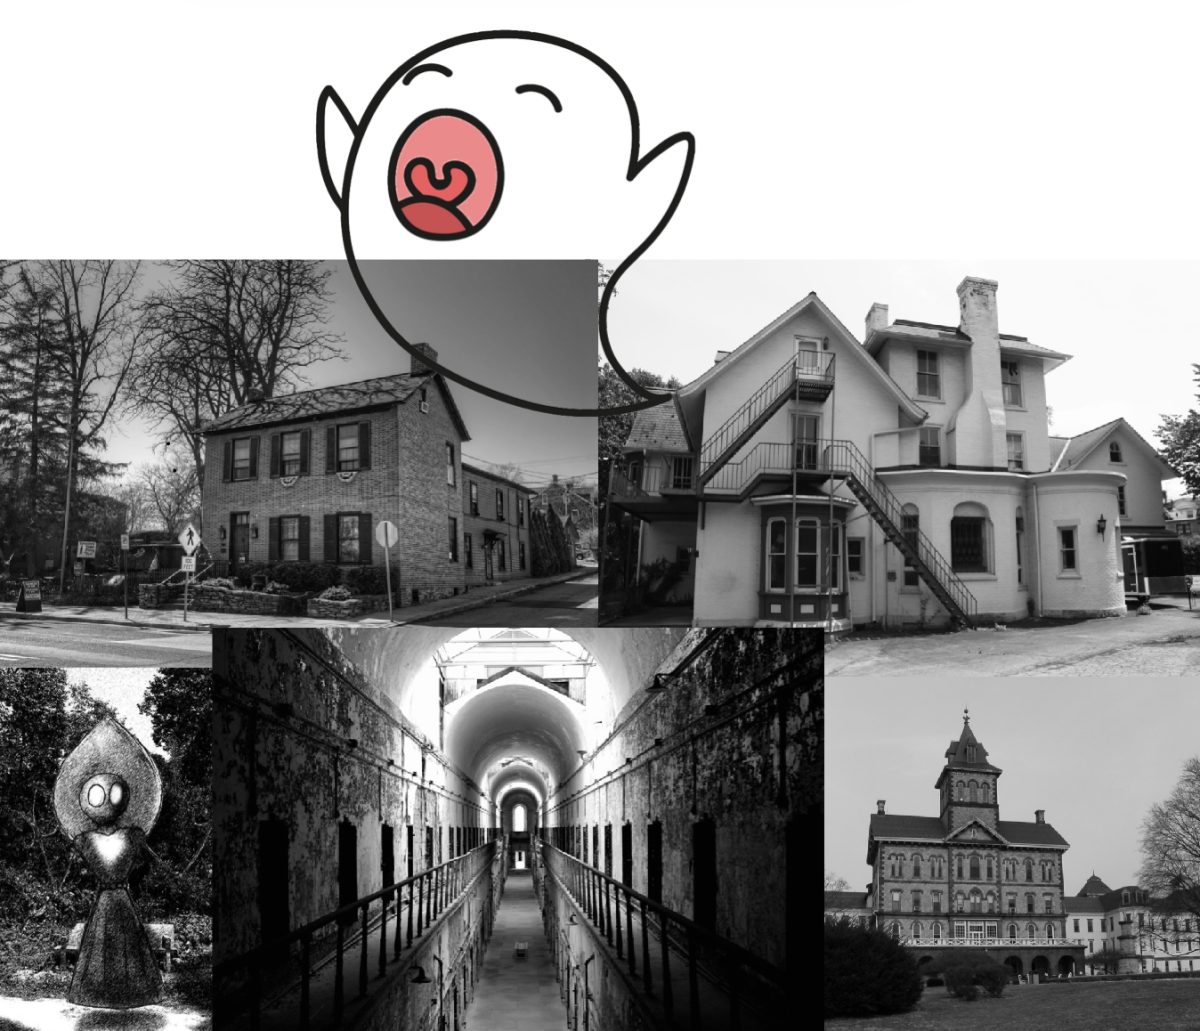 Pennsylvania+is+home+to+many+haunted+locations.++Every+Halloween%2C+people+flock+to+visit+these+sites.++